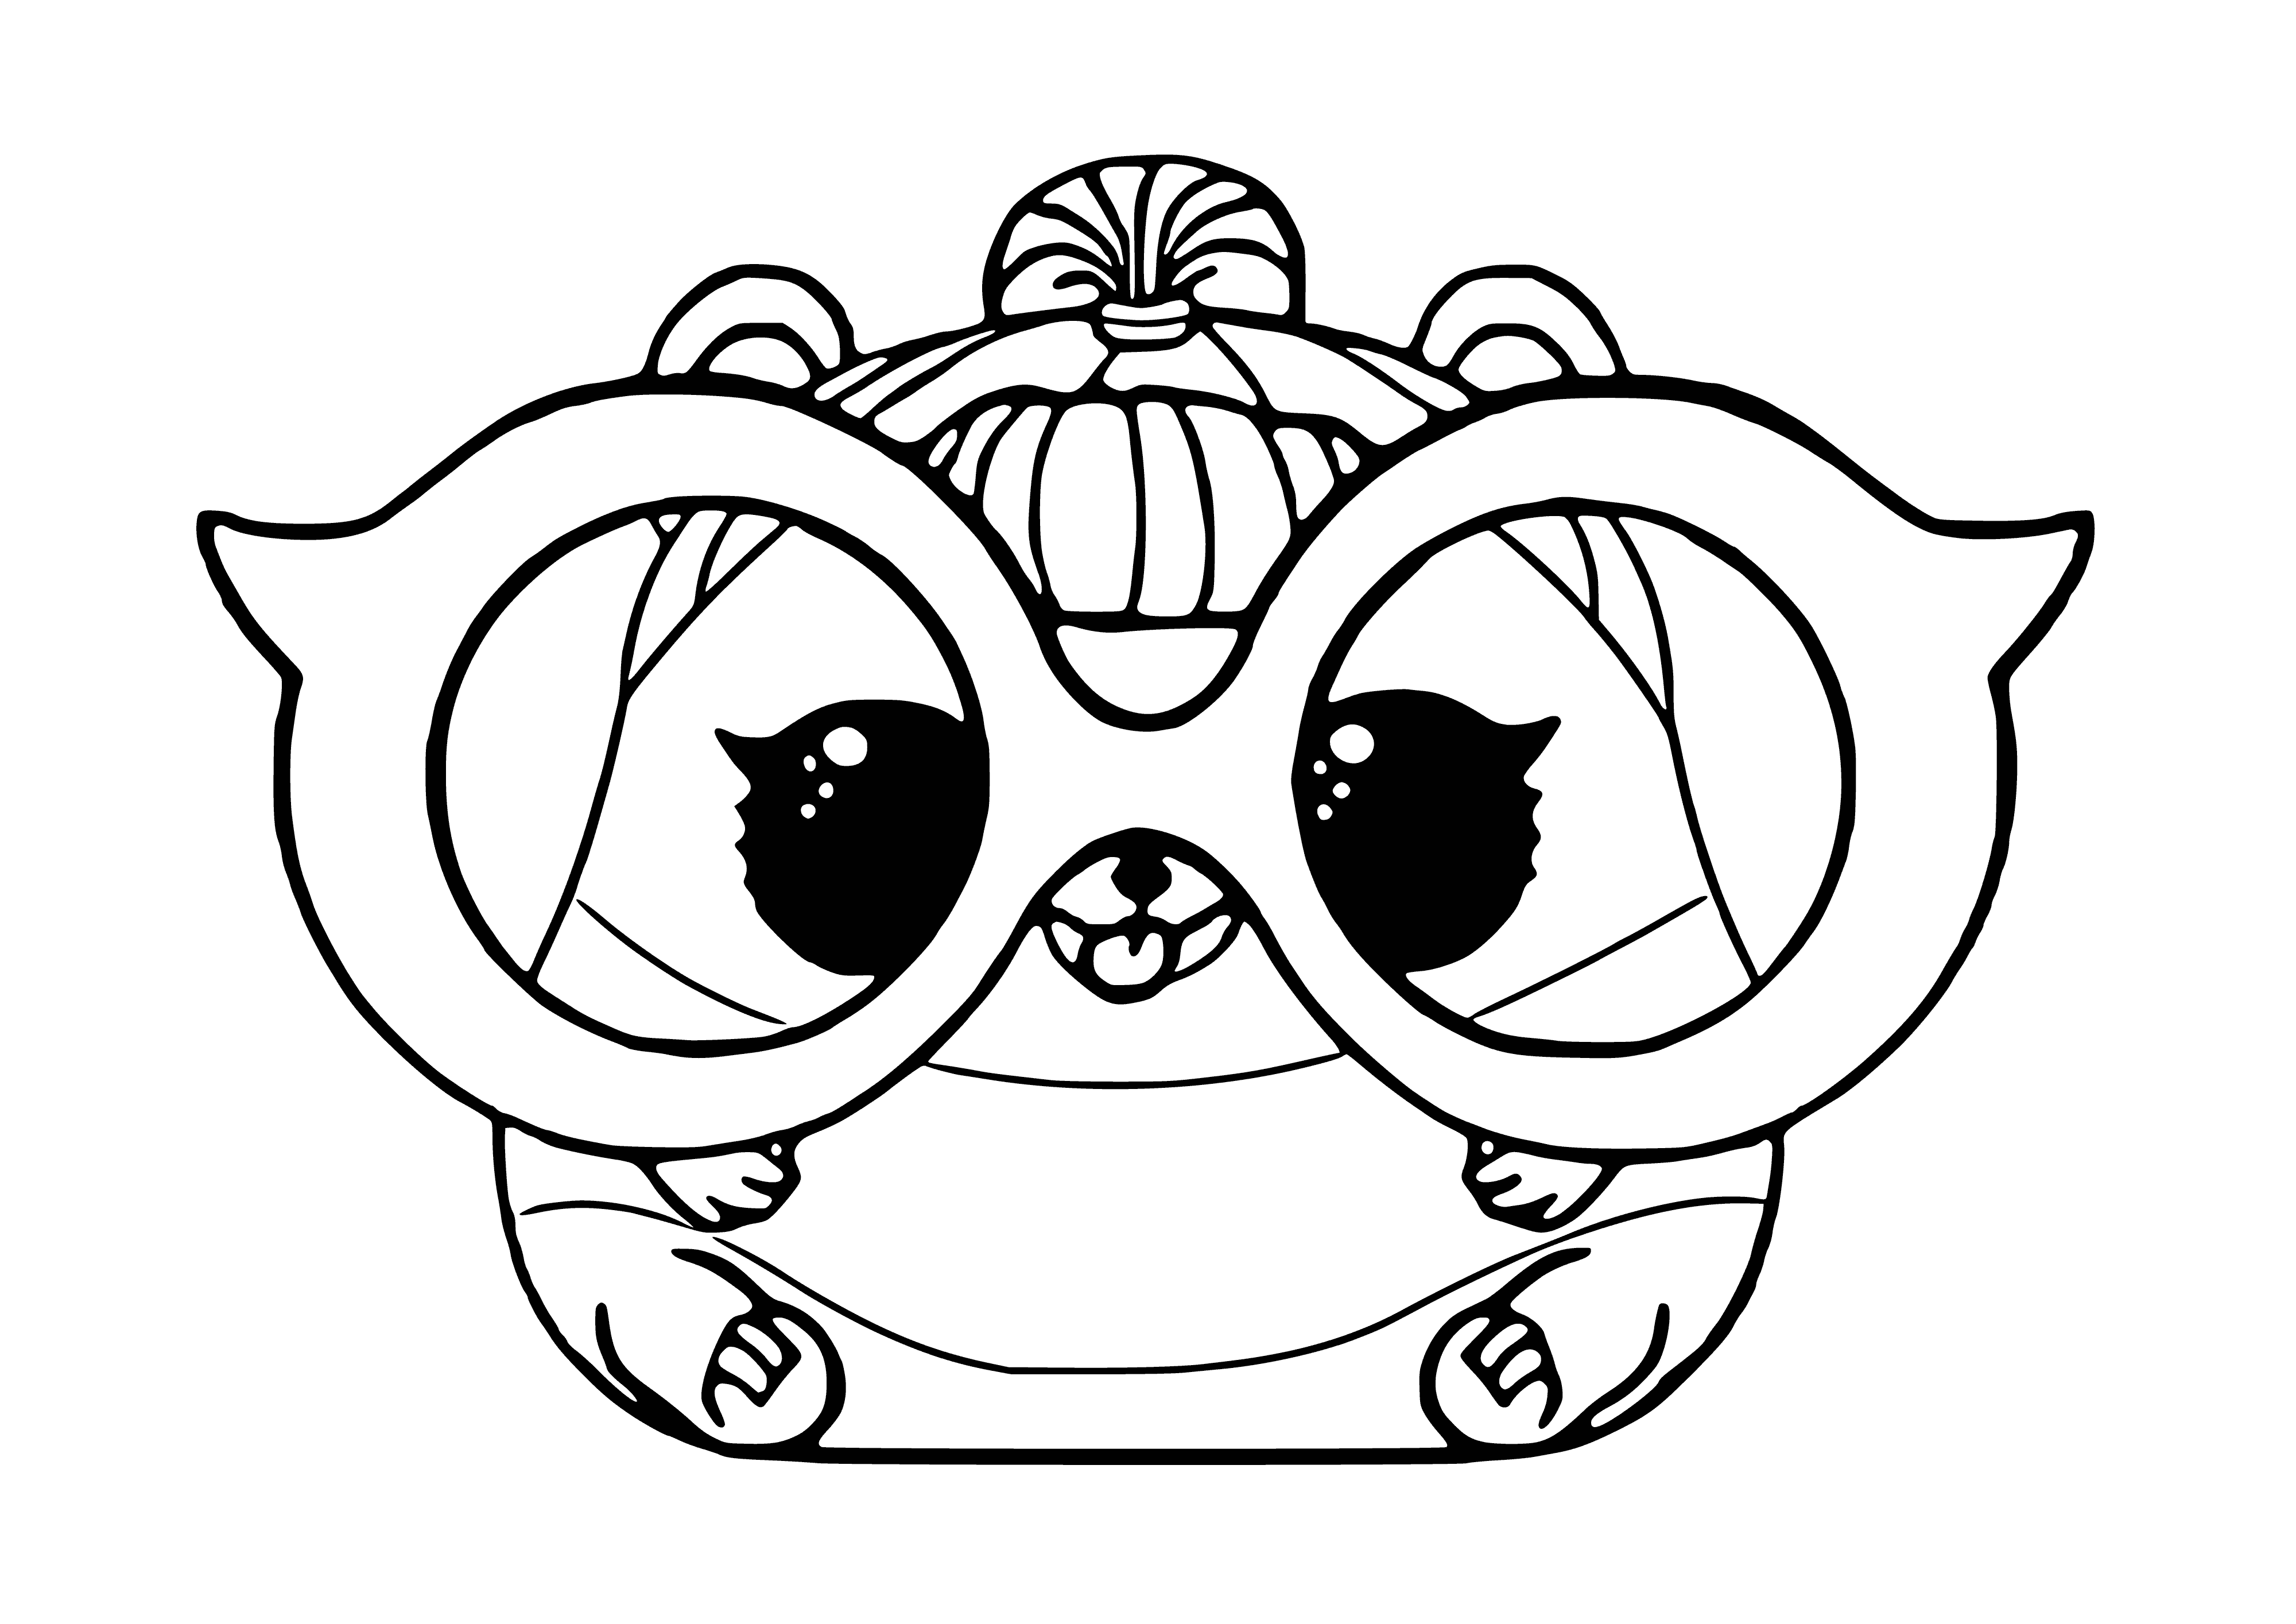 coloring page: Hamster in plastic ball, rolling around and having fun - light brown and white.